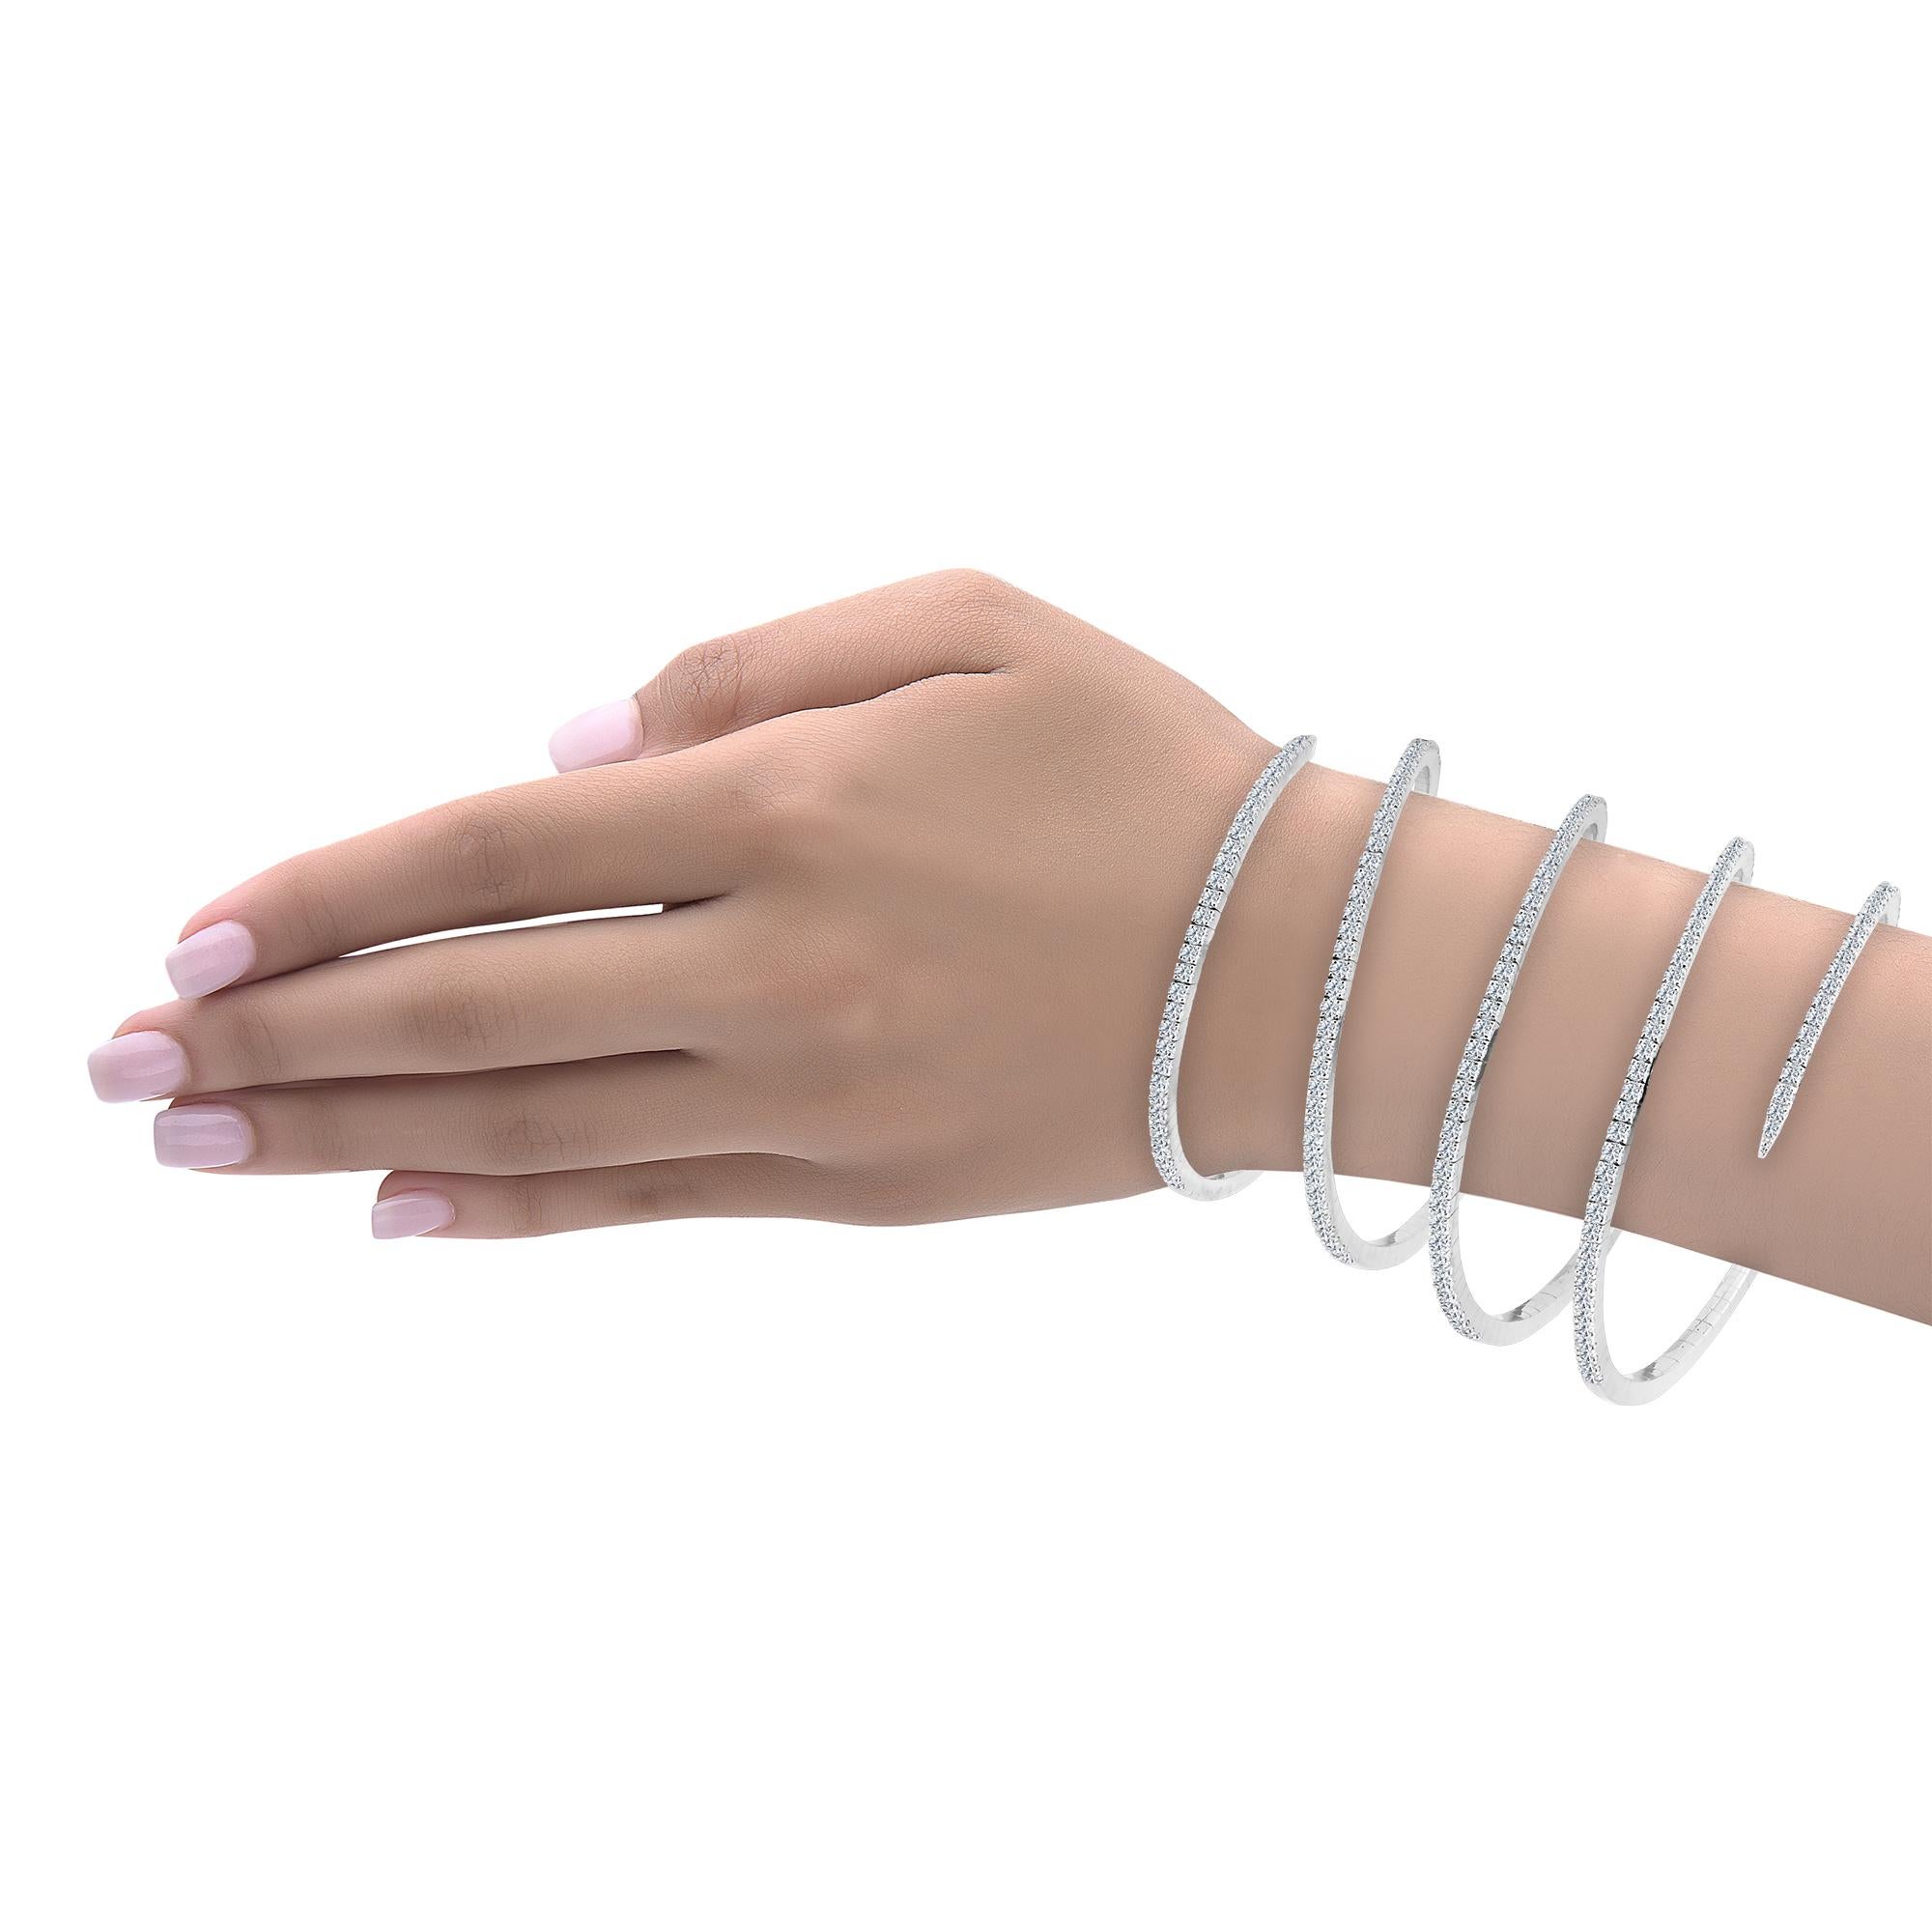 Hand made in the Emilio Jewelry Factory, this cuff is extremely flexible set in 14K white gold but can be ordered in 18K Yellow/white/Rose gold. This cuff is made with springs inside so is very durable, safe, and made to stretch! We also make this